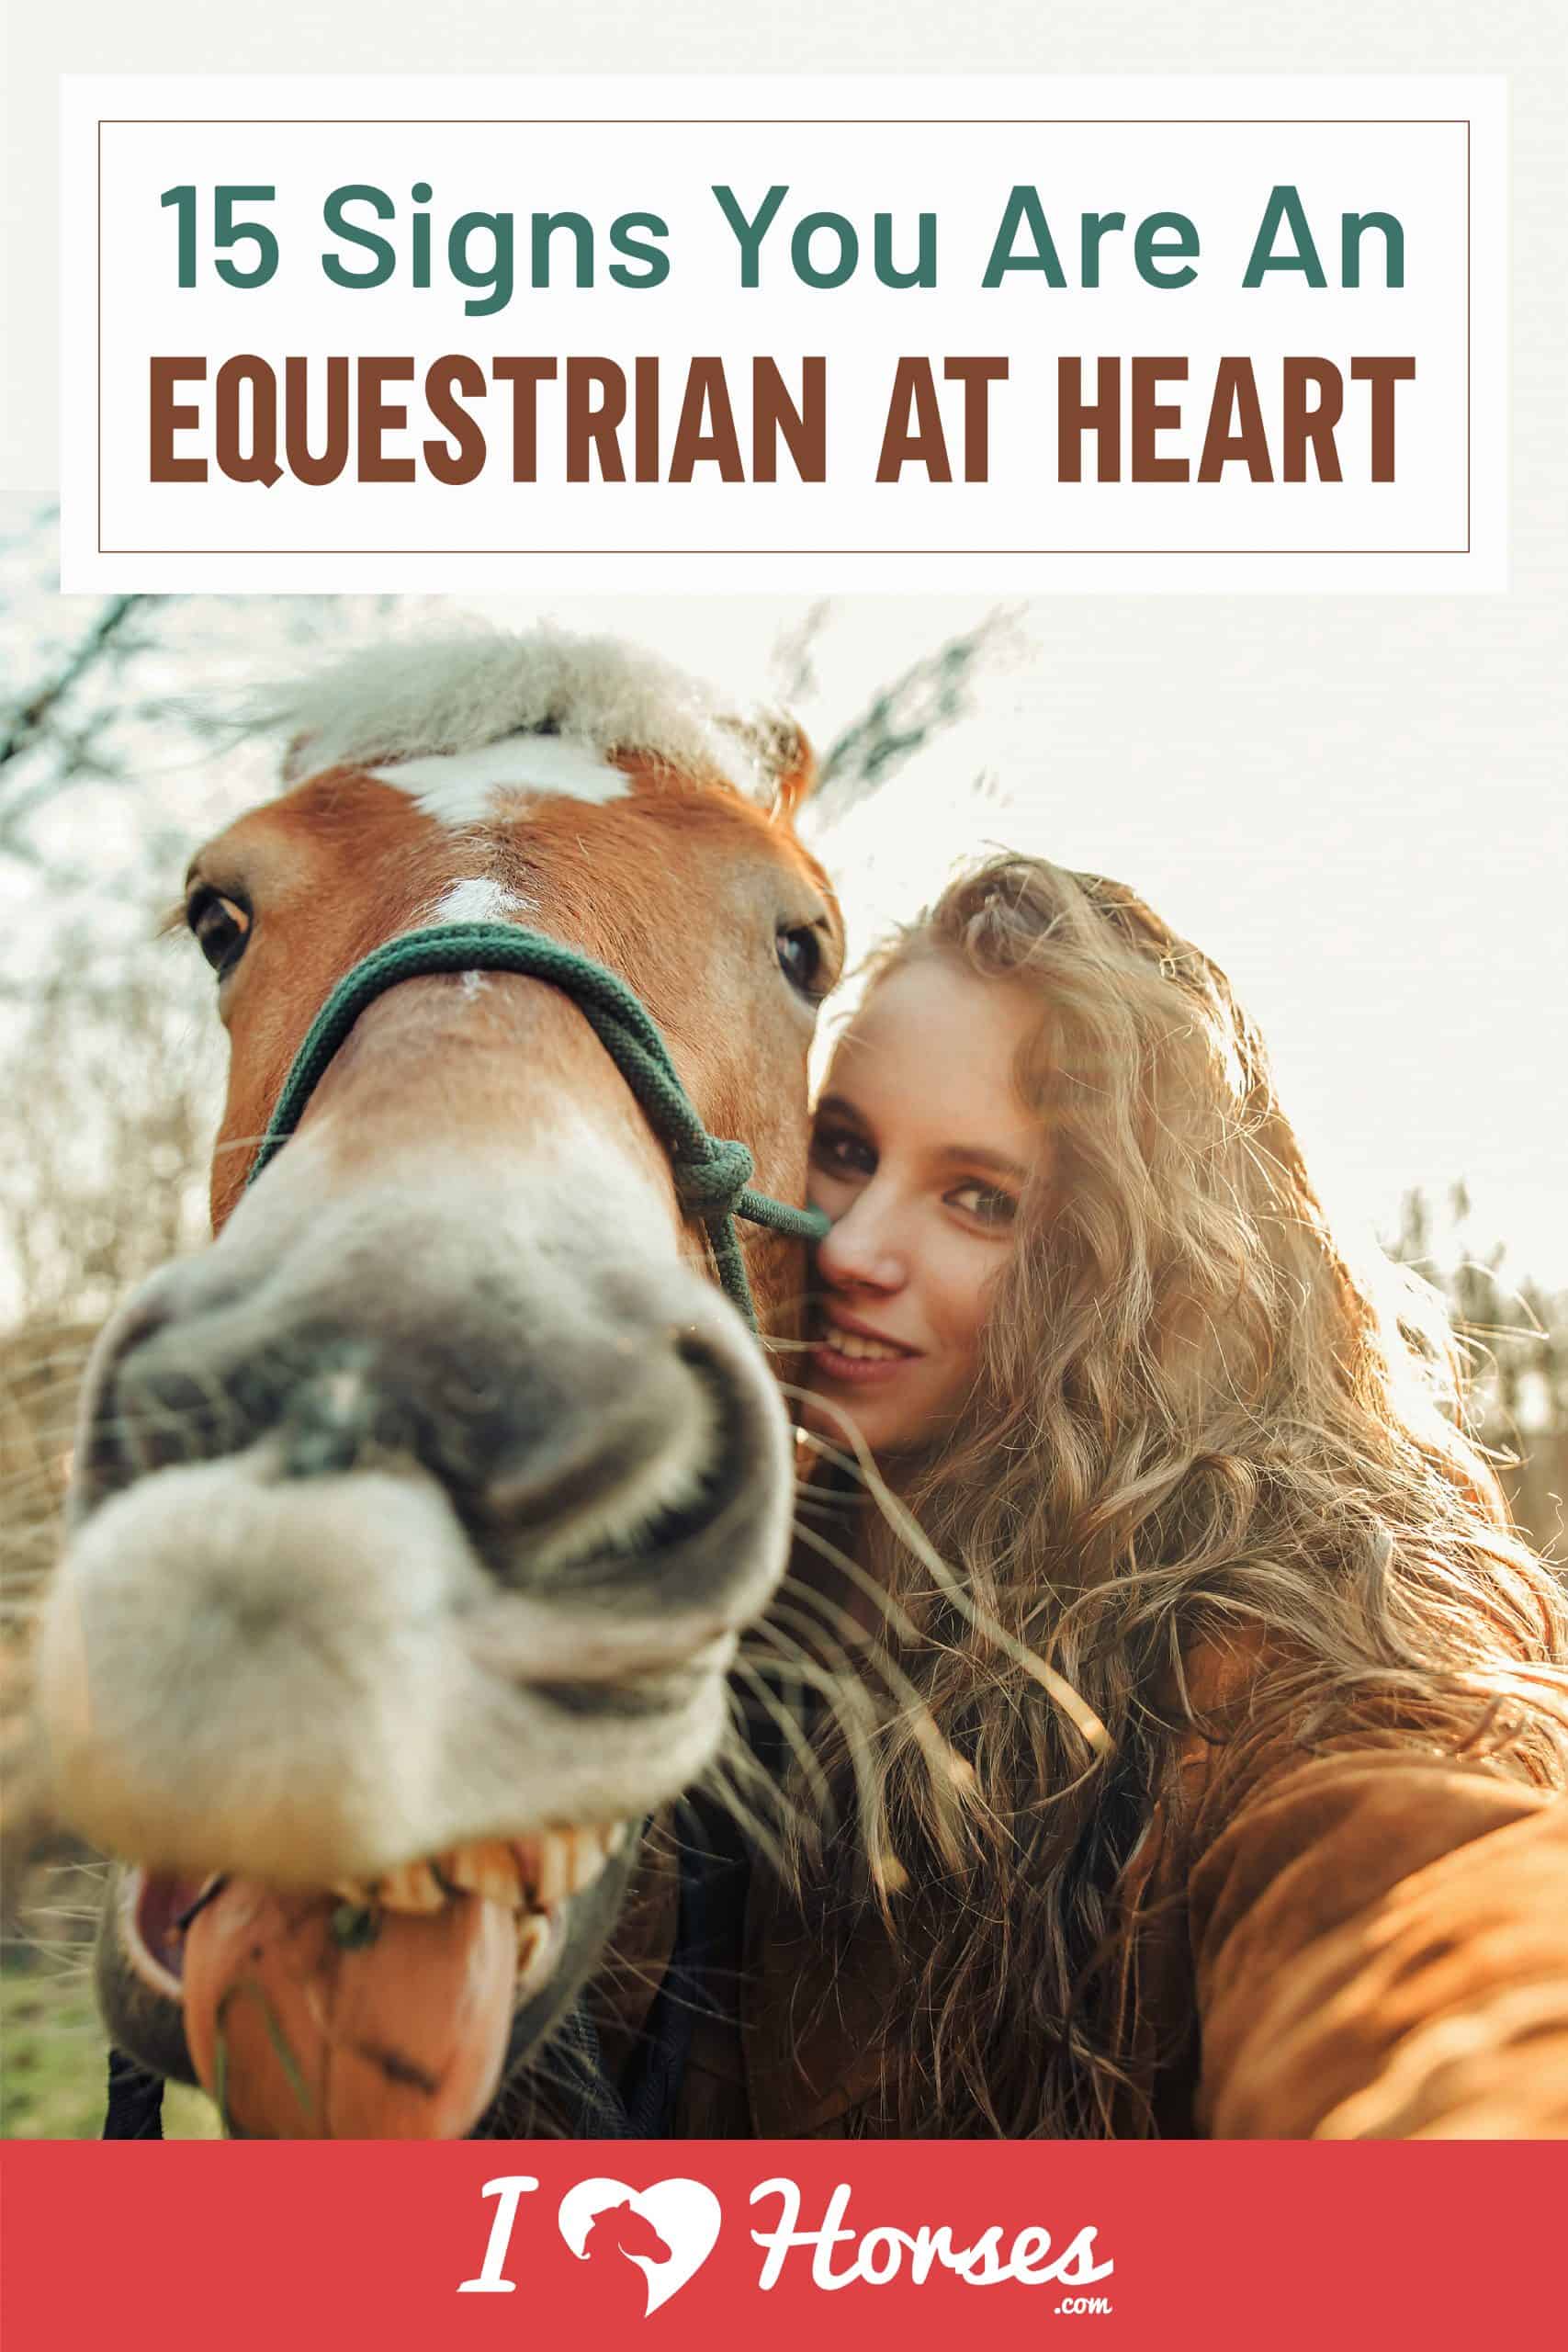 15 Signs You Are An Equestrian At Heart